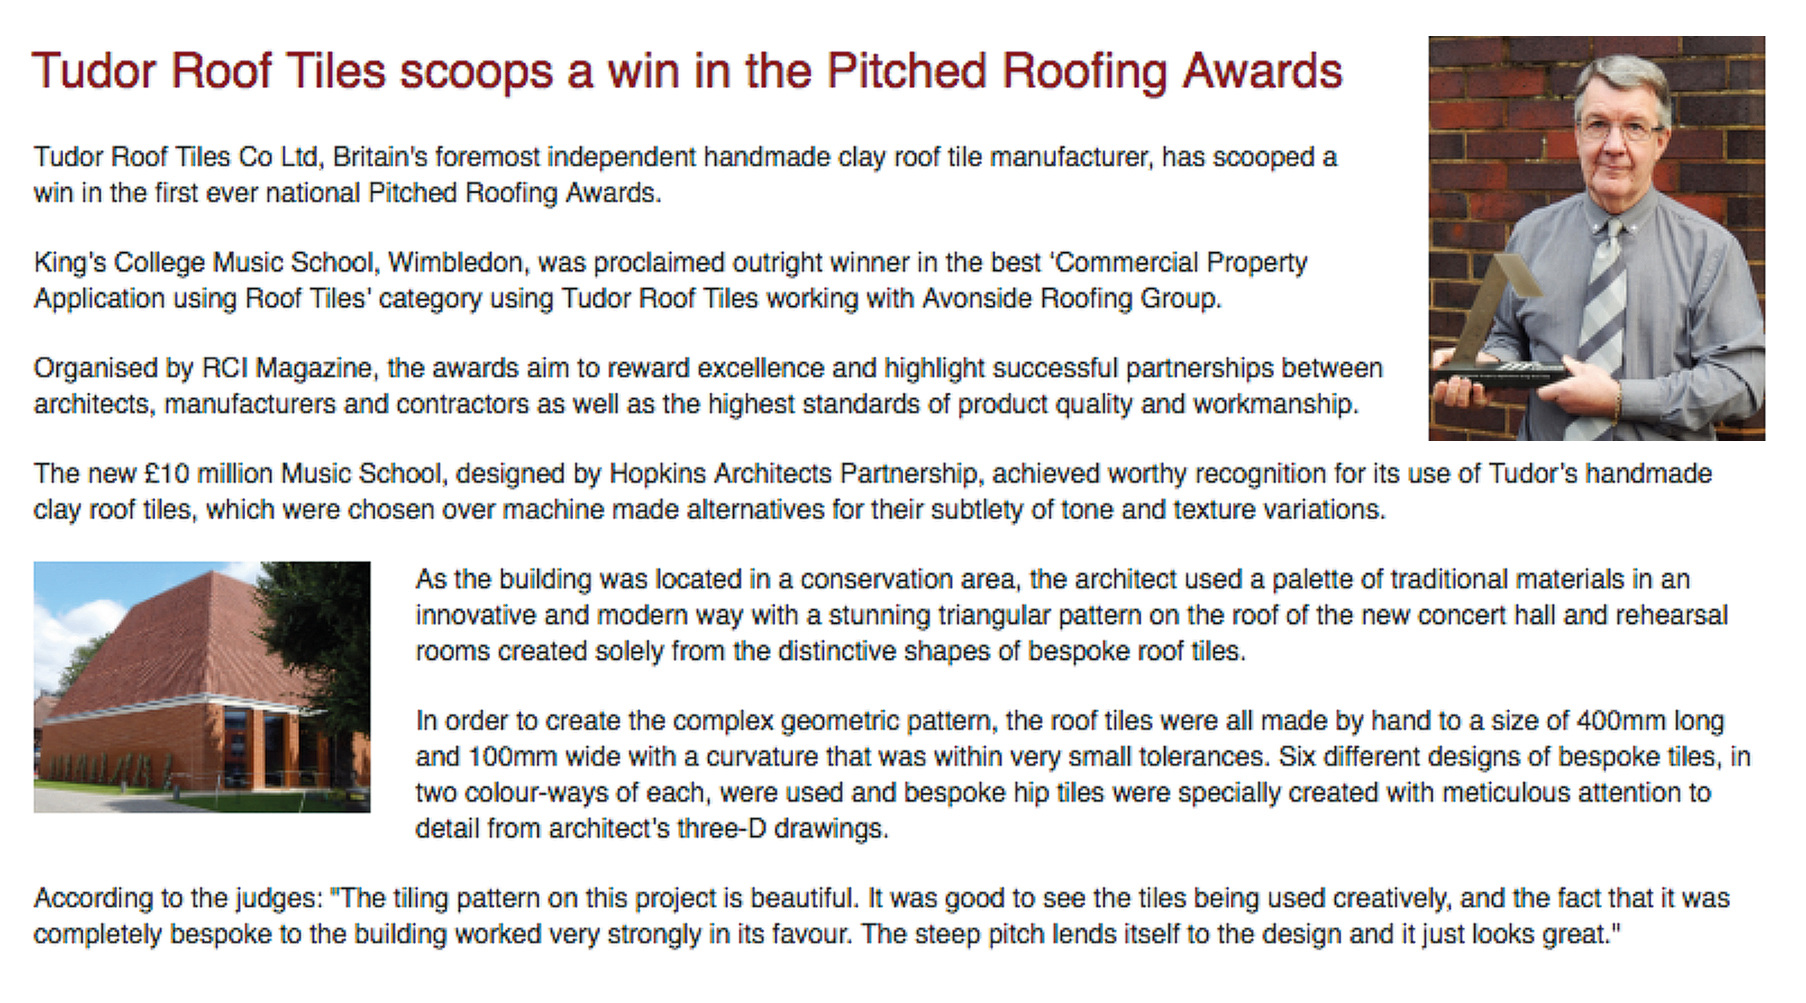 Tudor Roof Tiles scoops another award